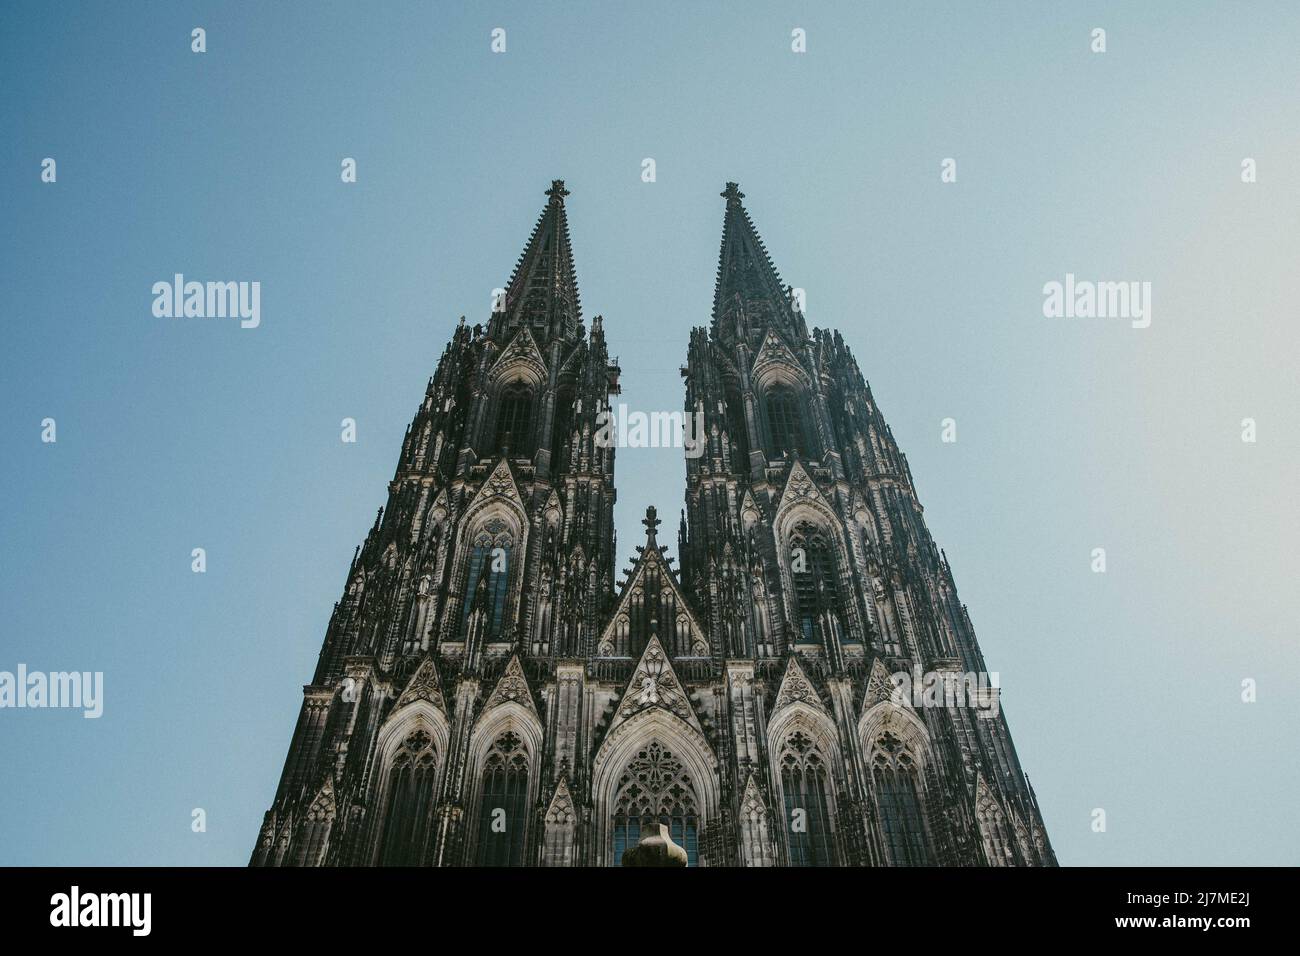 Looking up at the Kölner Dom (Cologne Cathedral) Stock Photo